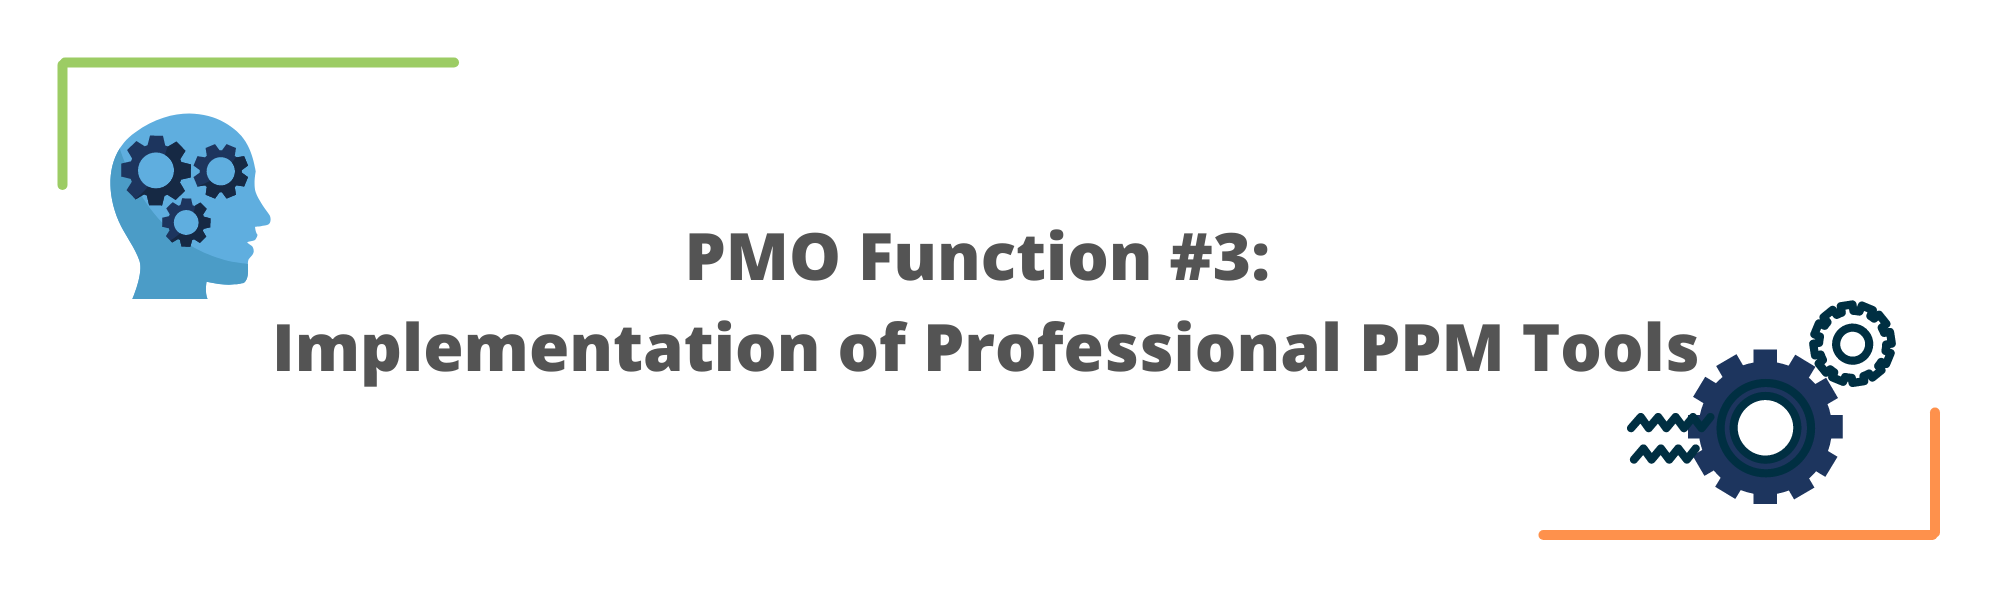 PMO Function #3 Implementation of Professional PPM Tools